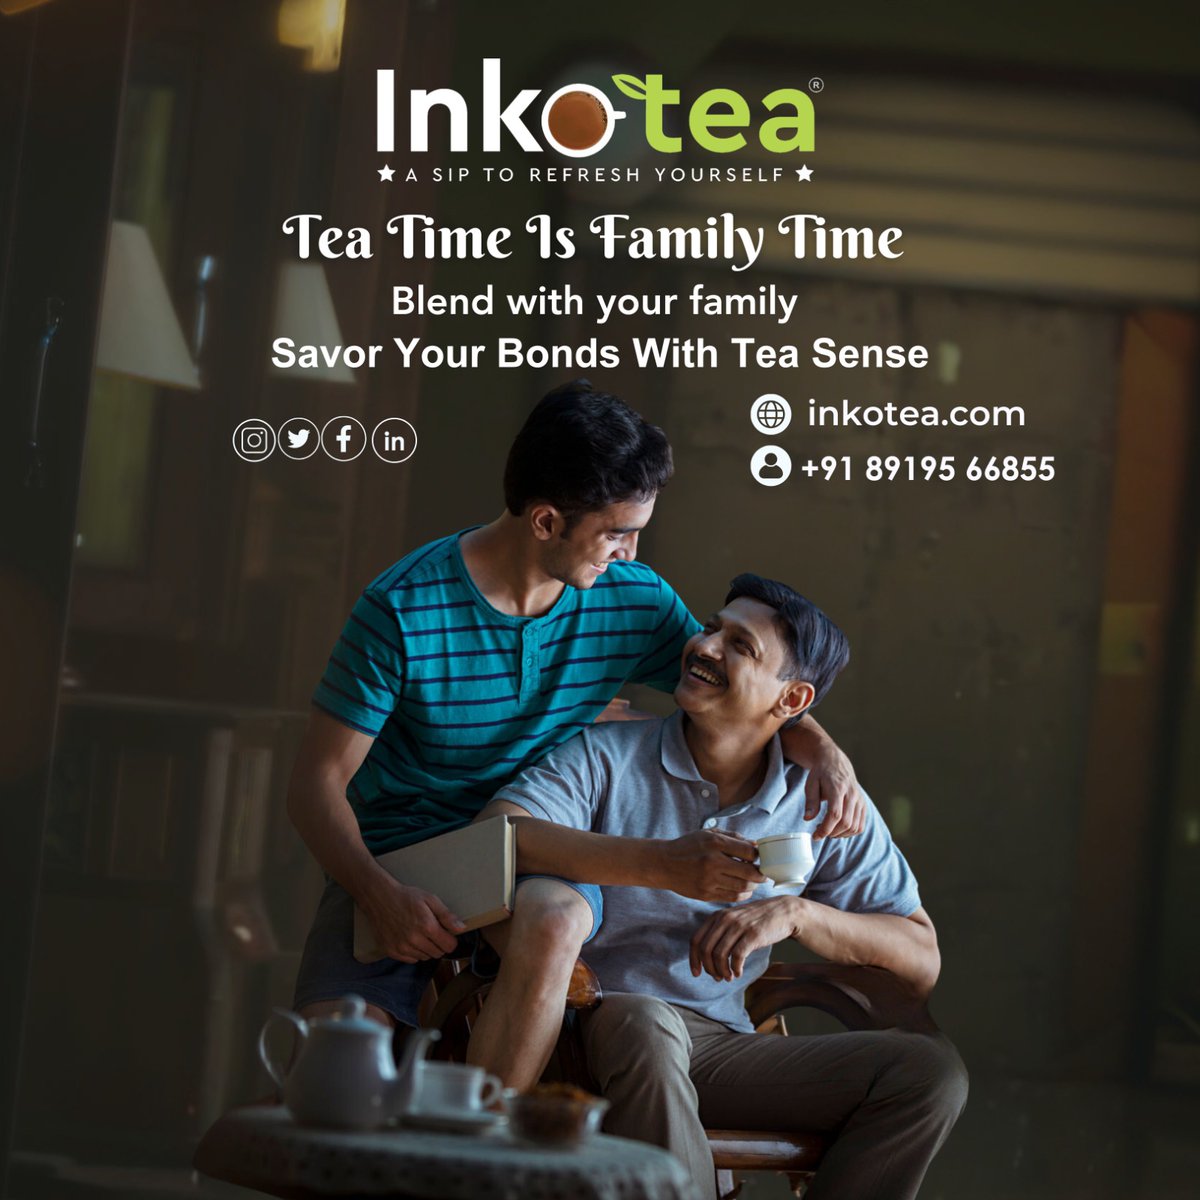 🍵 **Inkotea: A Sip to Refresh Yourself**
★ **Tea Time Is Family Time** ★
Blend with your family and savor your bonds with Tea Sense. Enjoy the refreshing taste of Inkotea and create cherished moments together. 🌿☕
#Inkotea #MasalaChai #SavorTheSip #TeaFlavors #TeaExploration